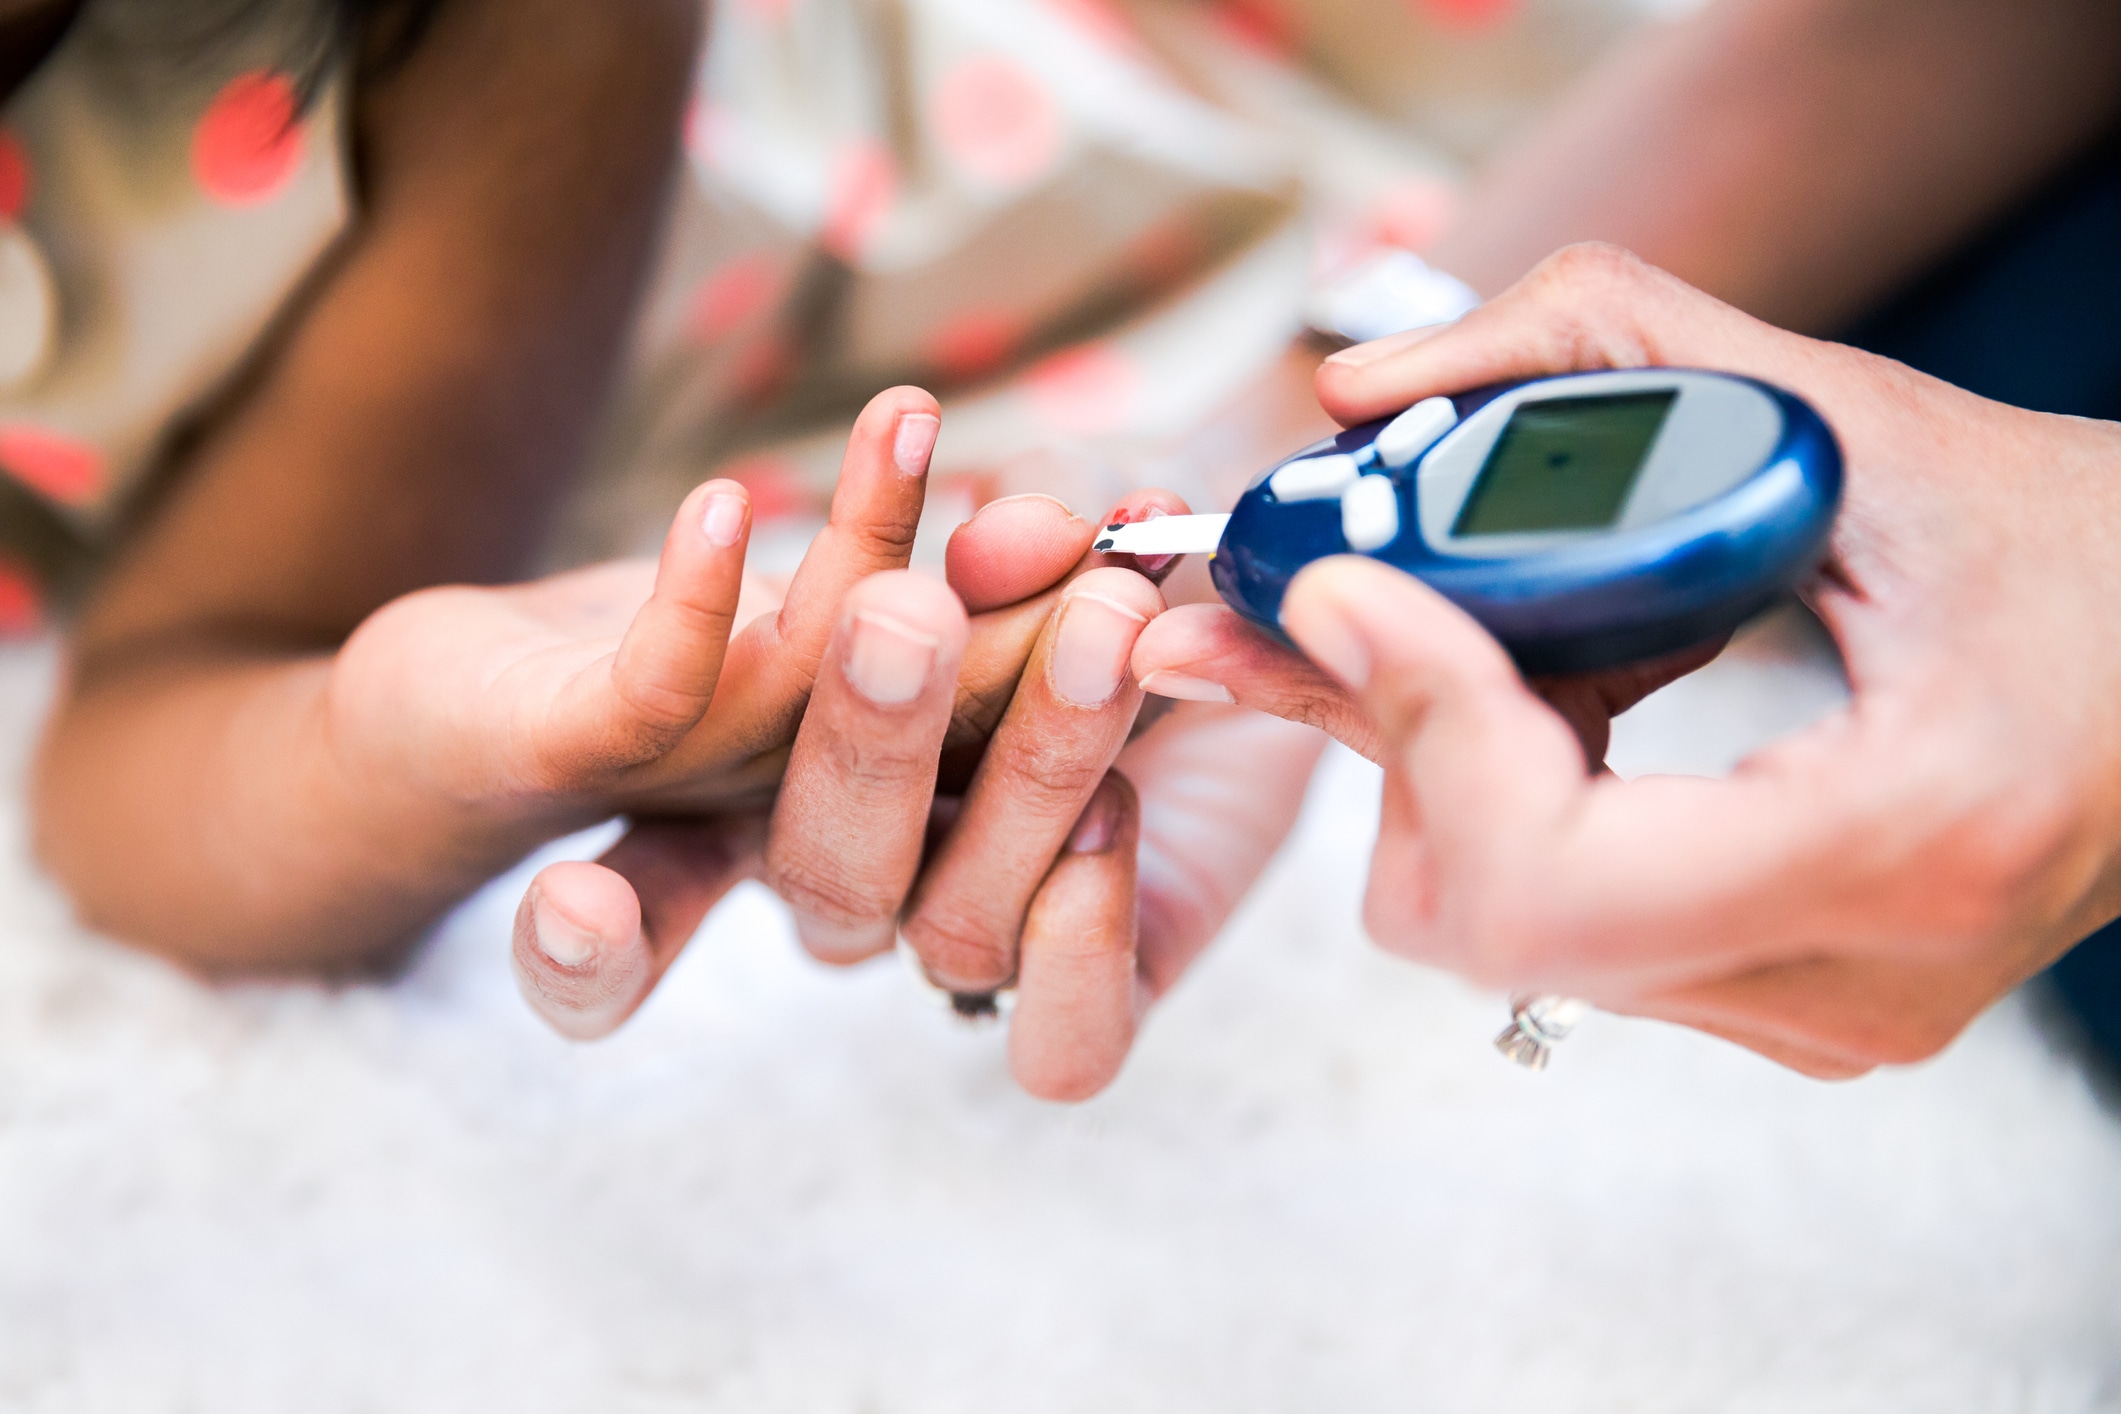 Mother is checking her daughters' diabetes by monitoring blood glucose